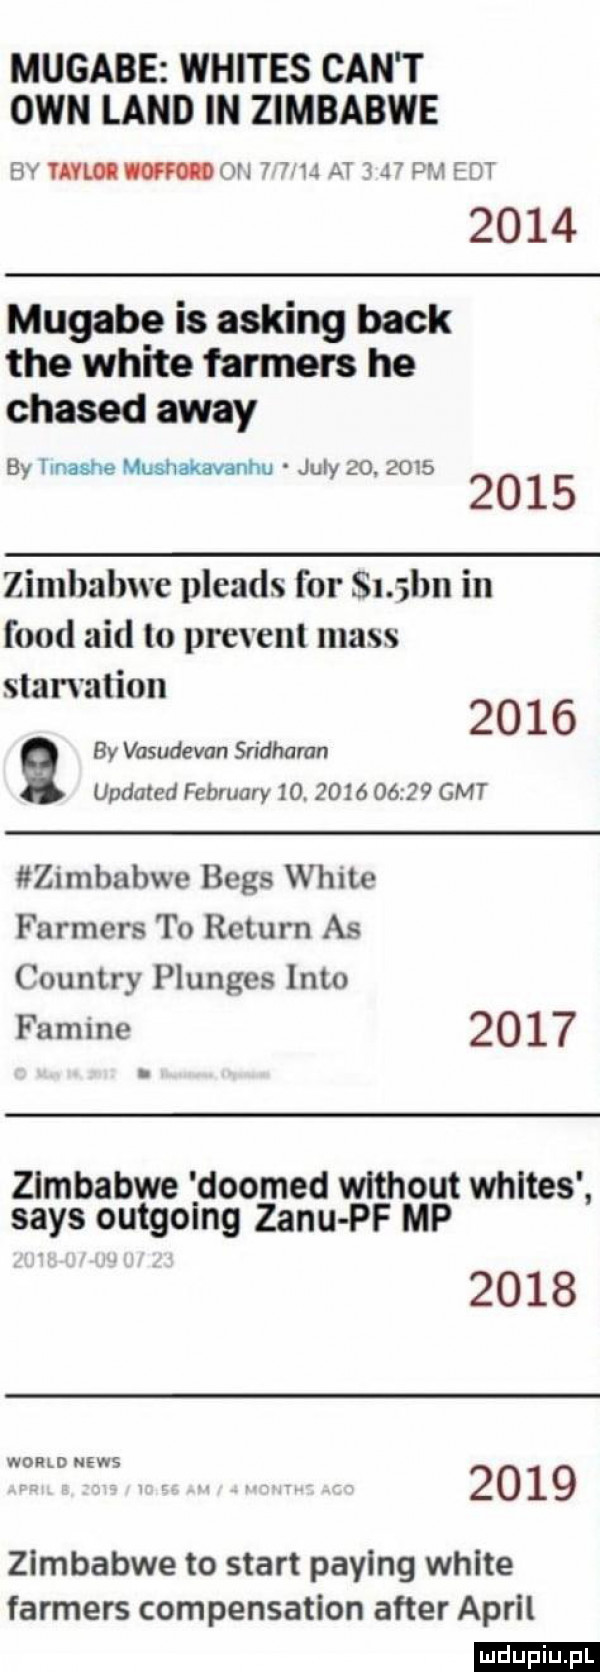 mugabe whites cen t ozn land in zimbabwe fw tavmwoh        at j pm fat      mugabe is asking beck tee white farmers he chasyd away by hnashe mushakavanhu judy              zimbabwe pleads for sl bn in fond aid to prezent mess starvation ev vusudevnn sridharan updated february   .            gat zimbabwe beis white farmers to return as country plunges iato famine      zimbabwe doomed wlthout whltes saks outgoing zenu pf mp      wromdnews      zimbabwe to start paying white farmers compensation after avril ludu iu. l